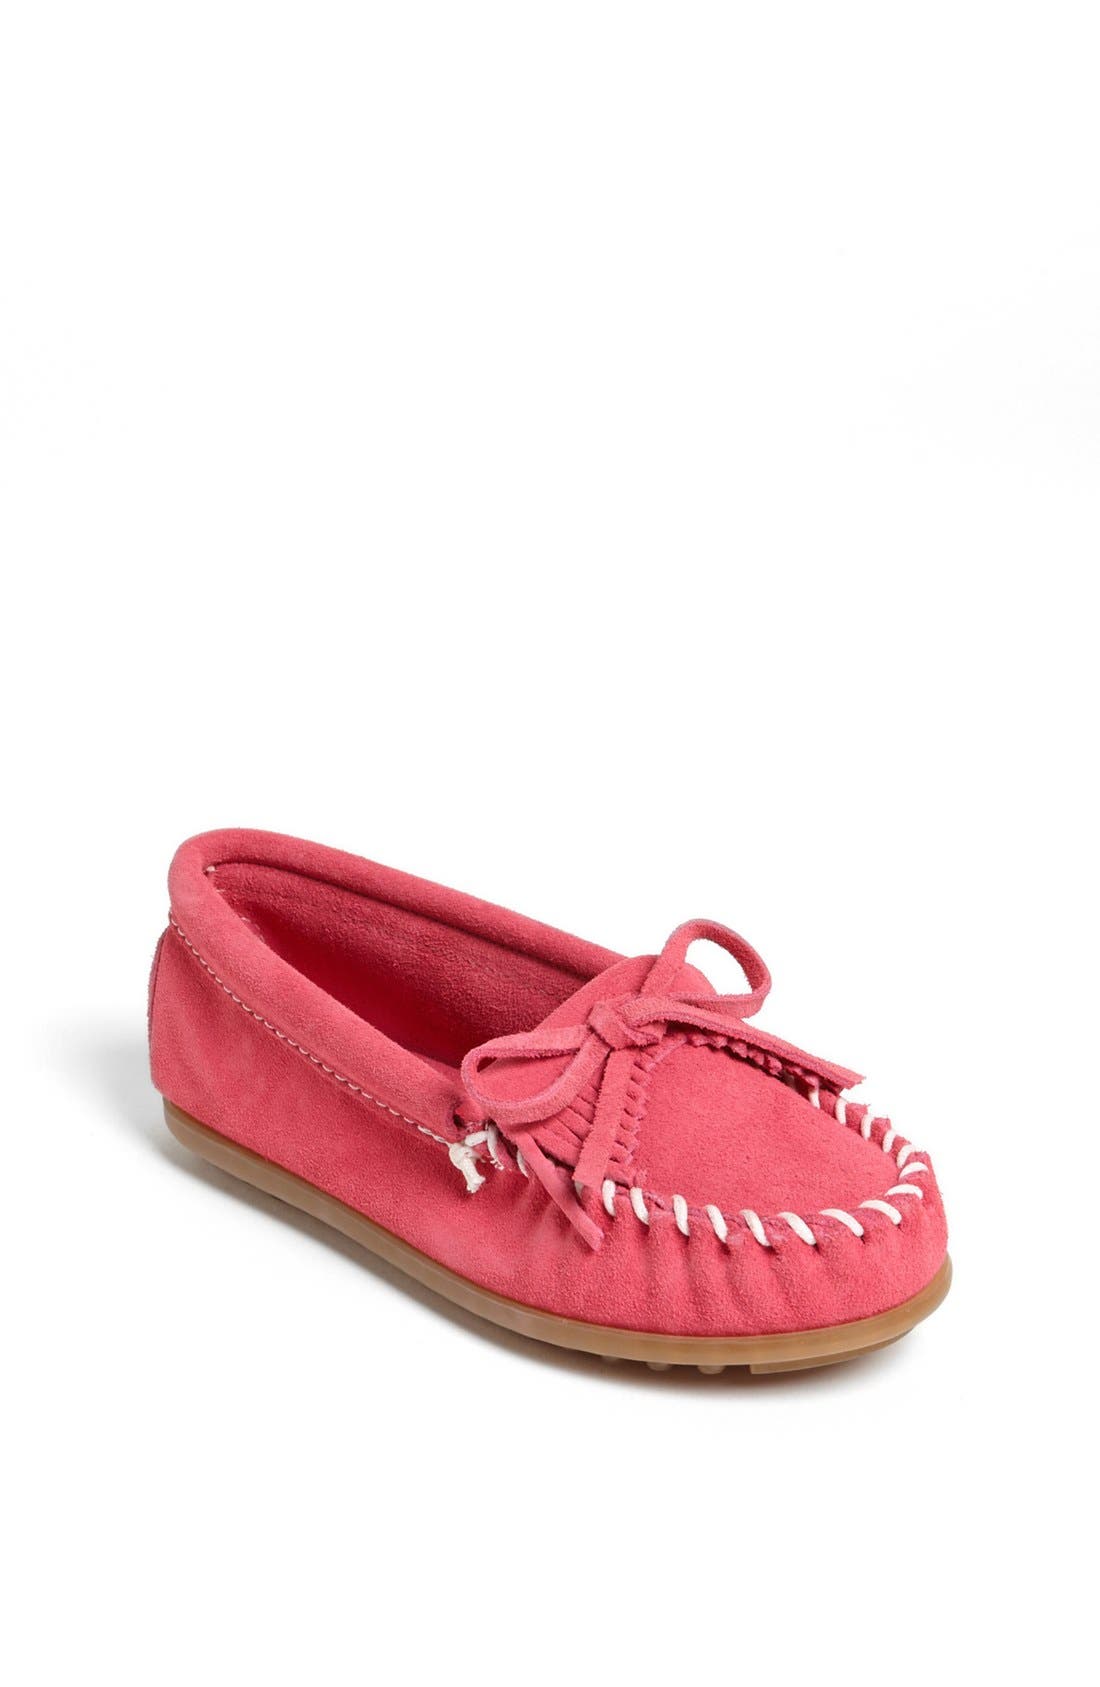 Little Girls' Moccasins Shoes (Sizes 12 